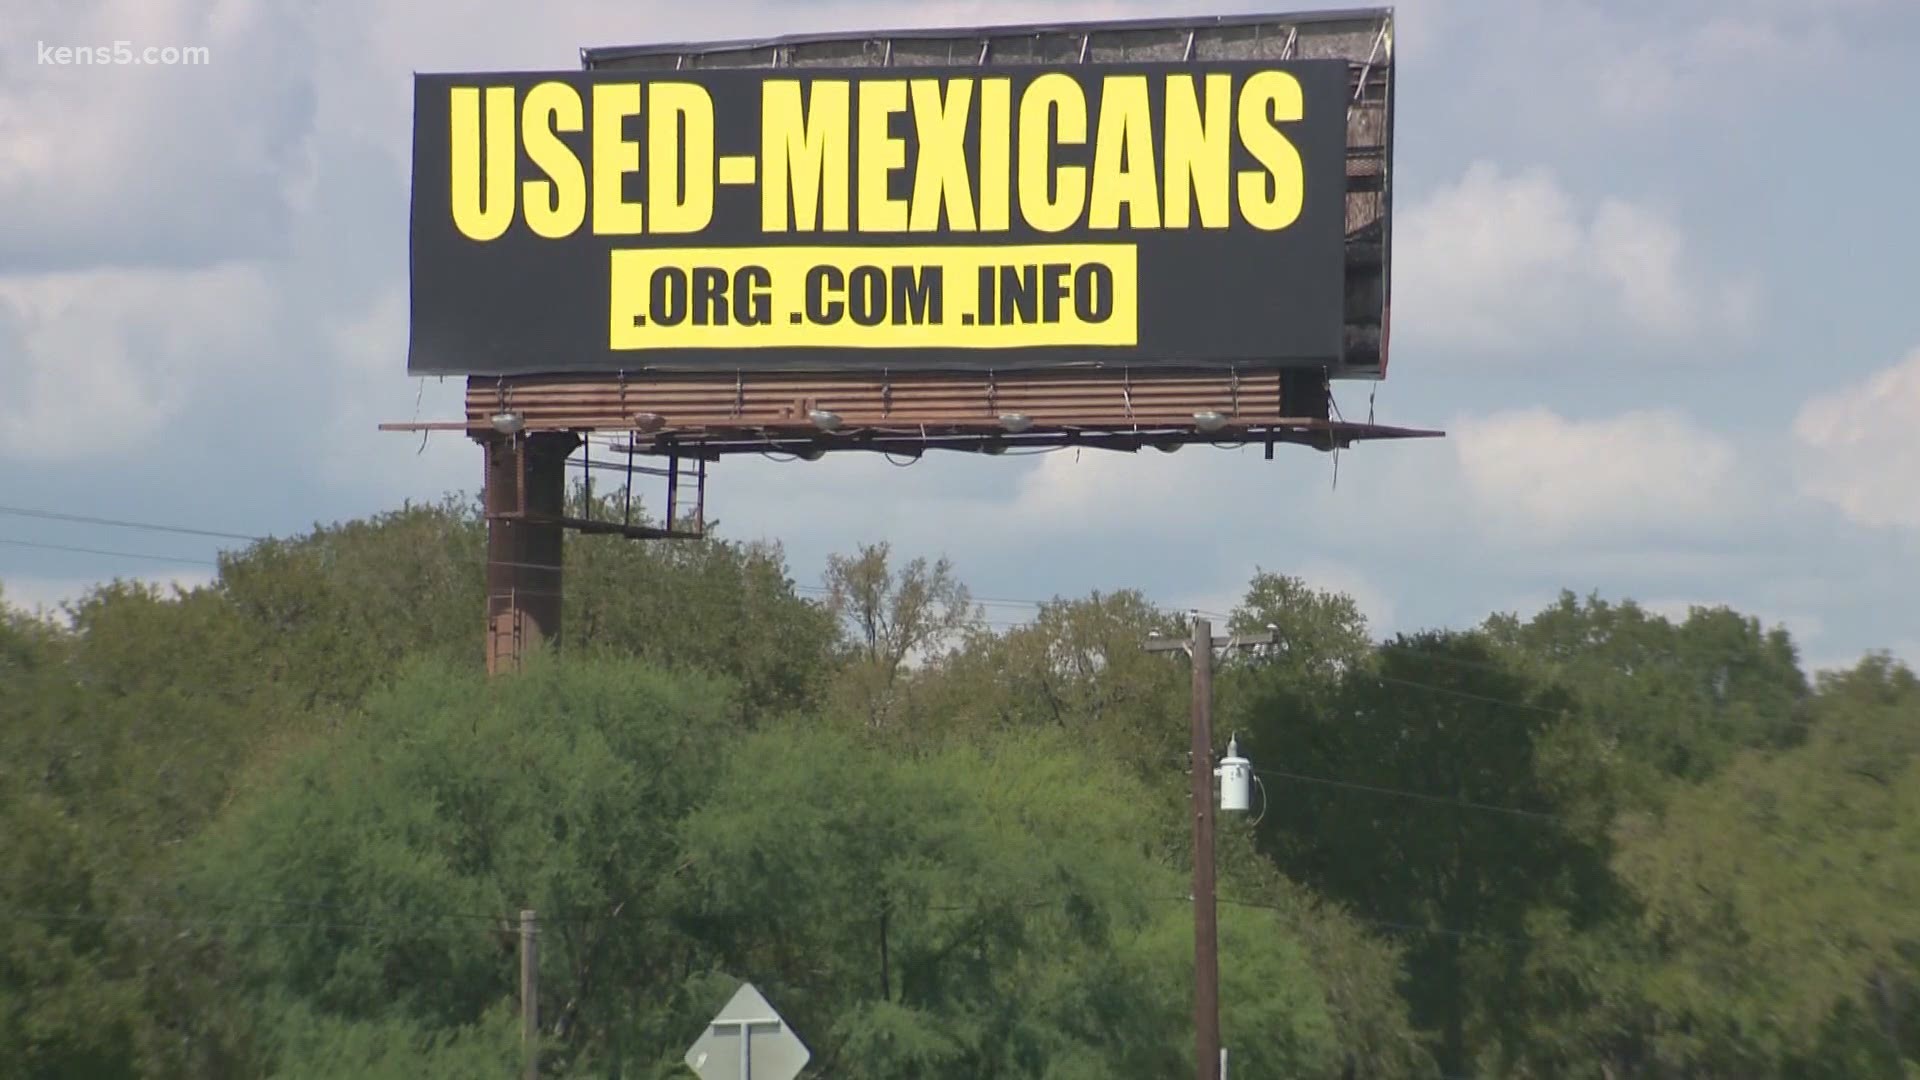 The man behind a billboard that read "USED-MEXICANS" before being taken down says he was making a political statement.